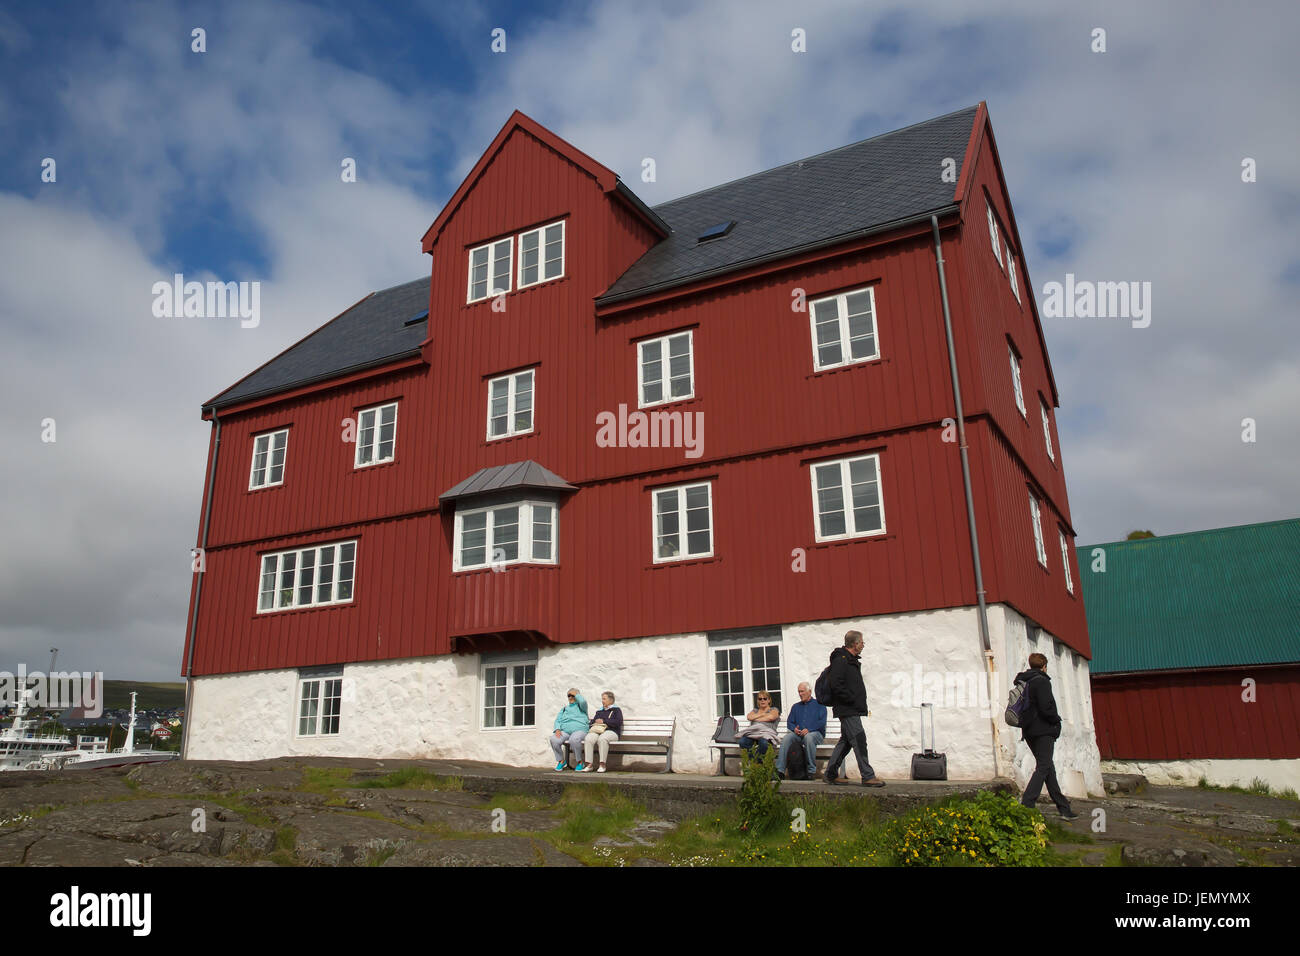 Tinganes is the historic location of the Faroese landsstýri, and is a part of Tórshavn. The name means 'parliament jetty' or 'parliament point' in Faroese. Its the oldest parliamentary building in the world. Stock Photo